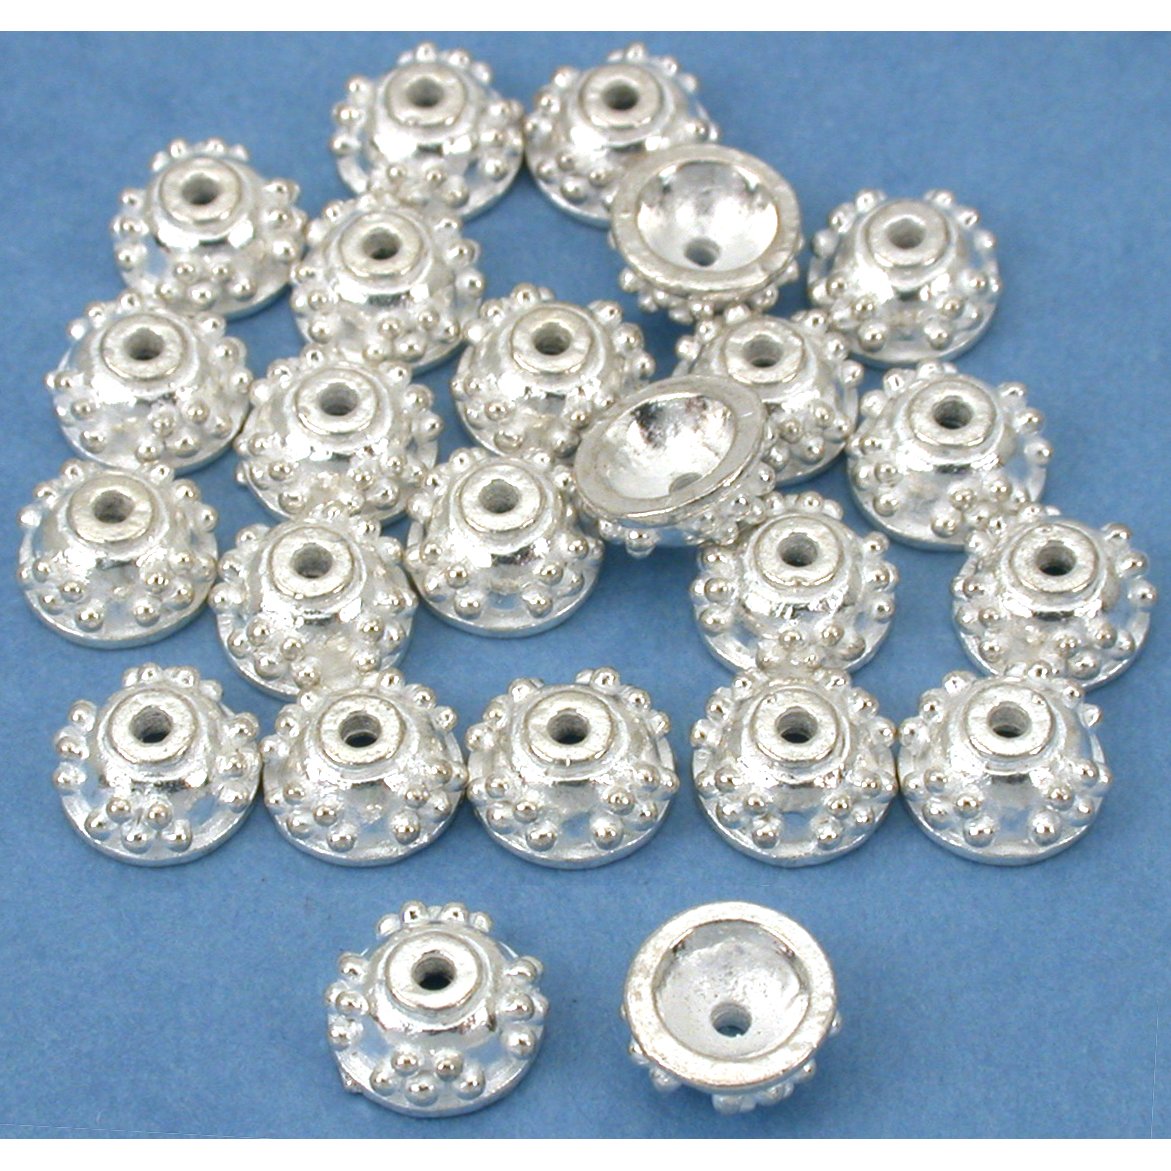 Bali Bead Caps Silver Plated 7mm 24Pcs Approx.